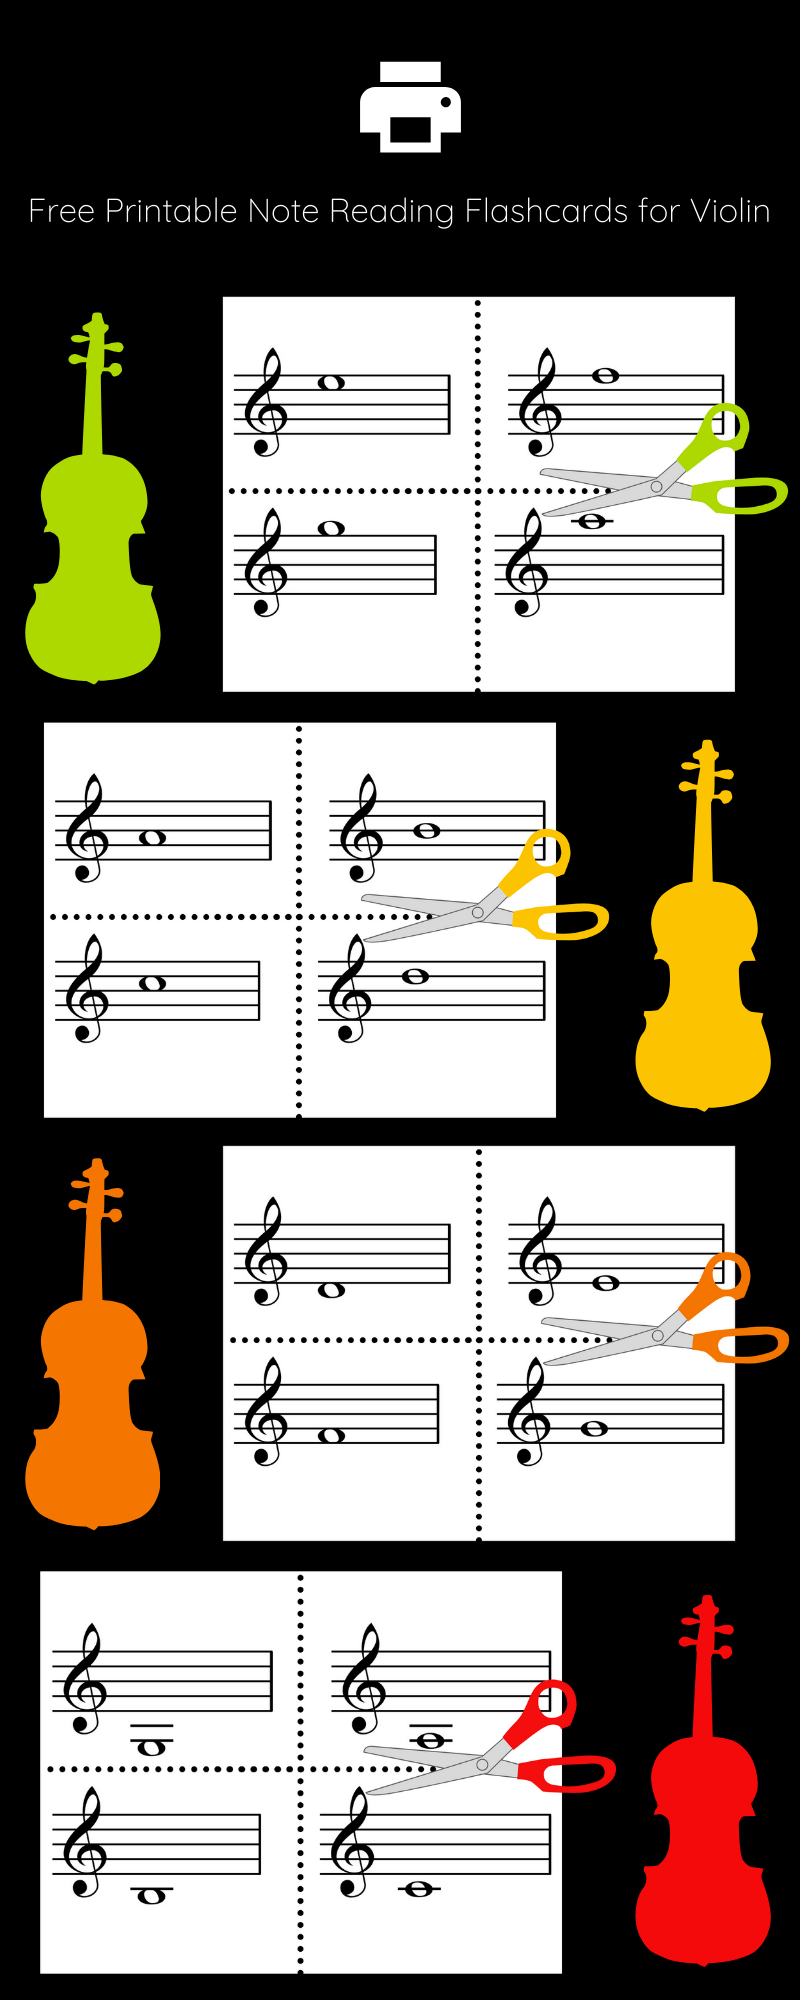 Note Reading Flashcards Free Printable Learning Music Notes Music Flashcards Violin Beginner Learning